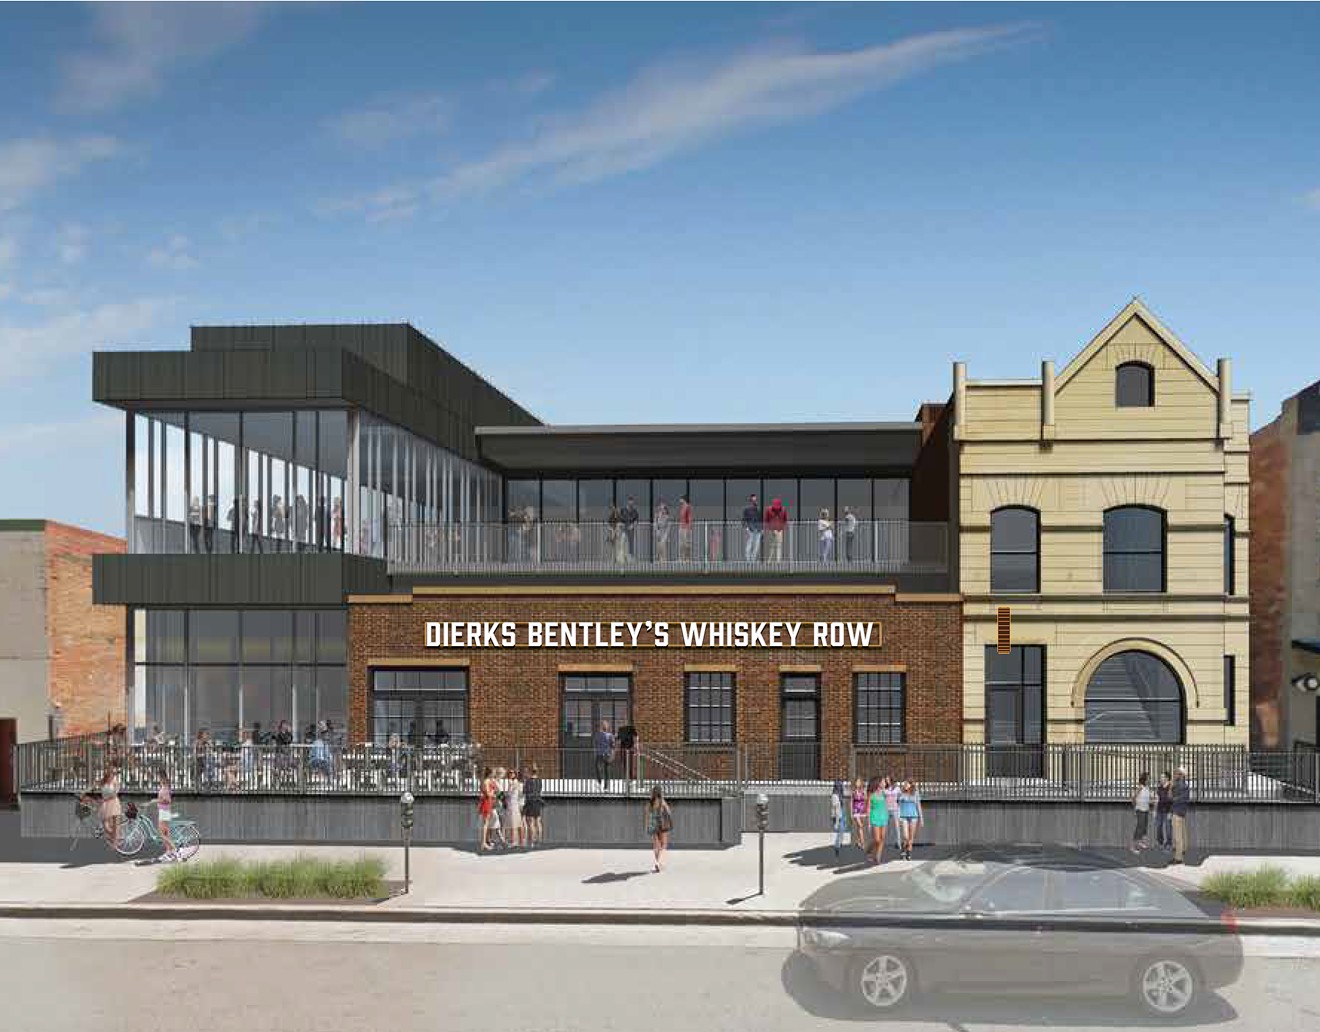 Dierks Bentley’s Whiskey Row opens on New Year's Eve.